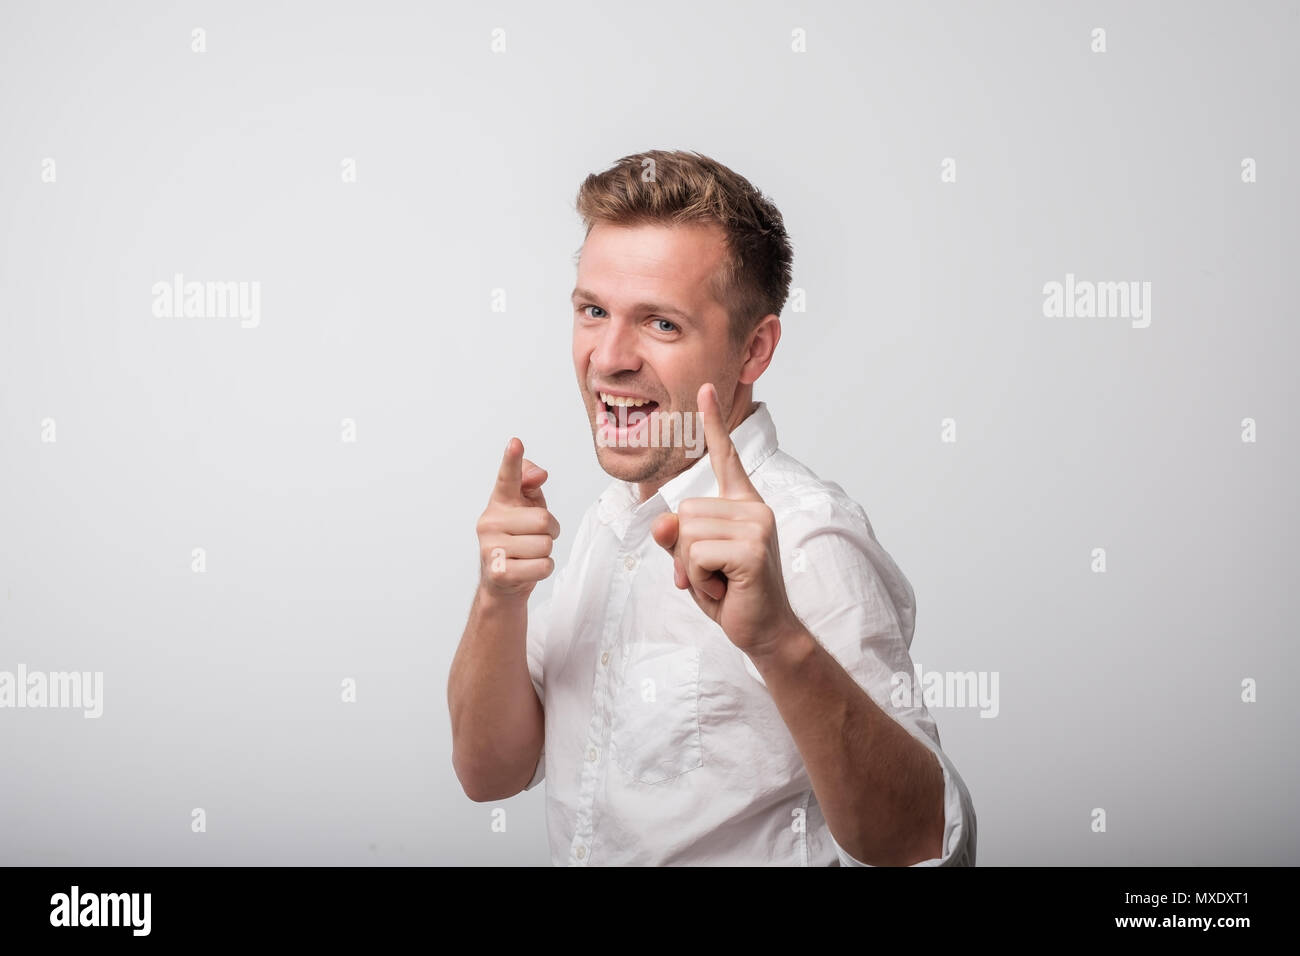 Happy caucasian man standing and smiling. Beautiful male half-length portrait. Stock Photo